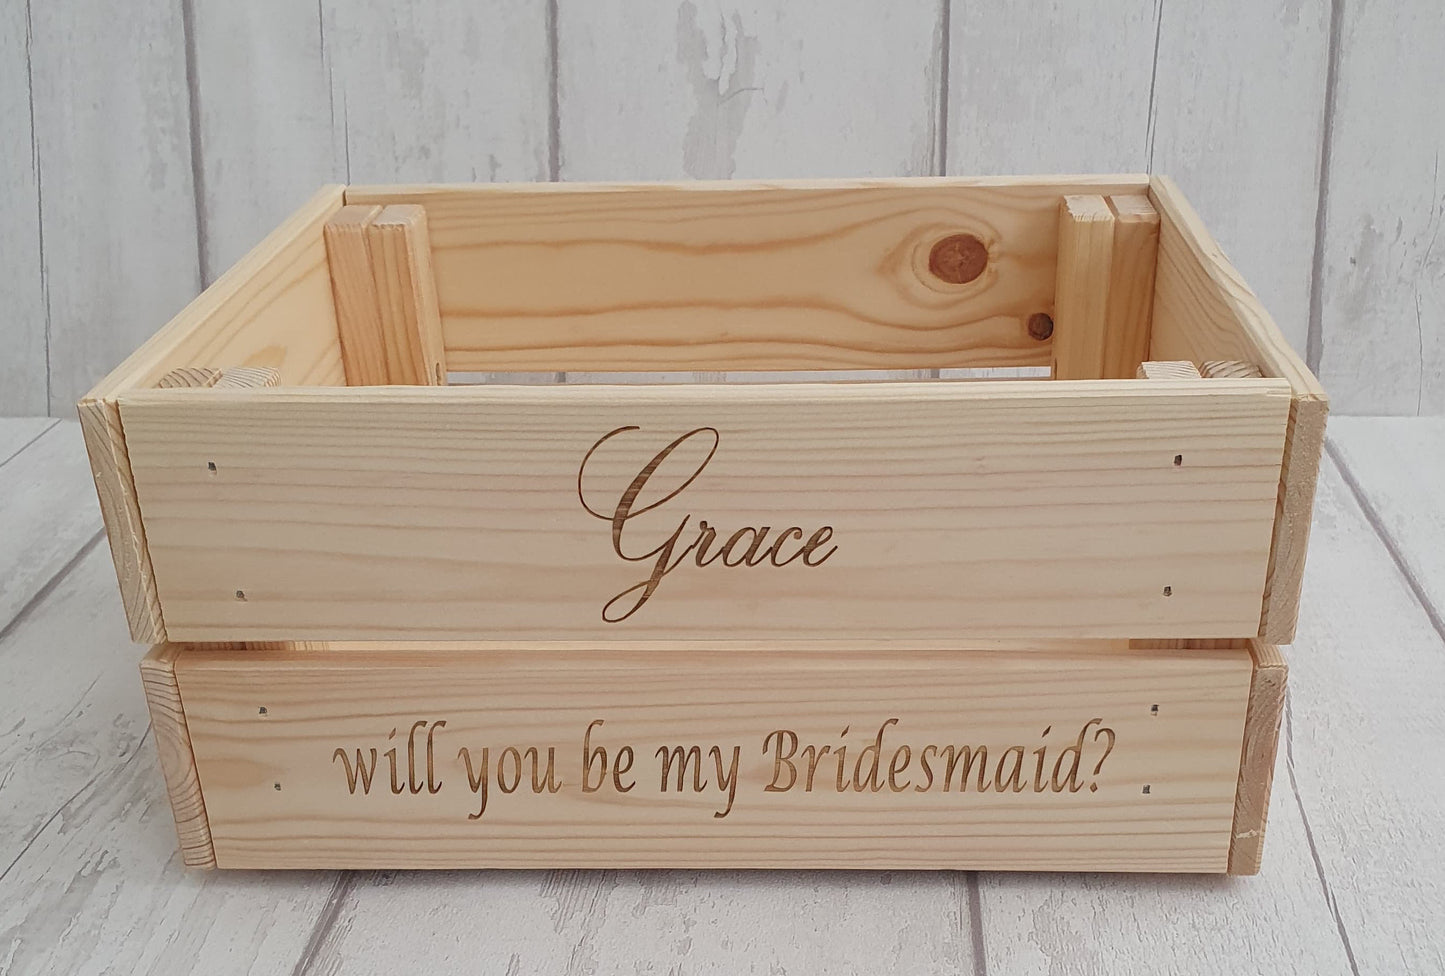 Personalised "will you be my Bridesmaid?" crate - LaserGiftsuk